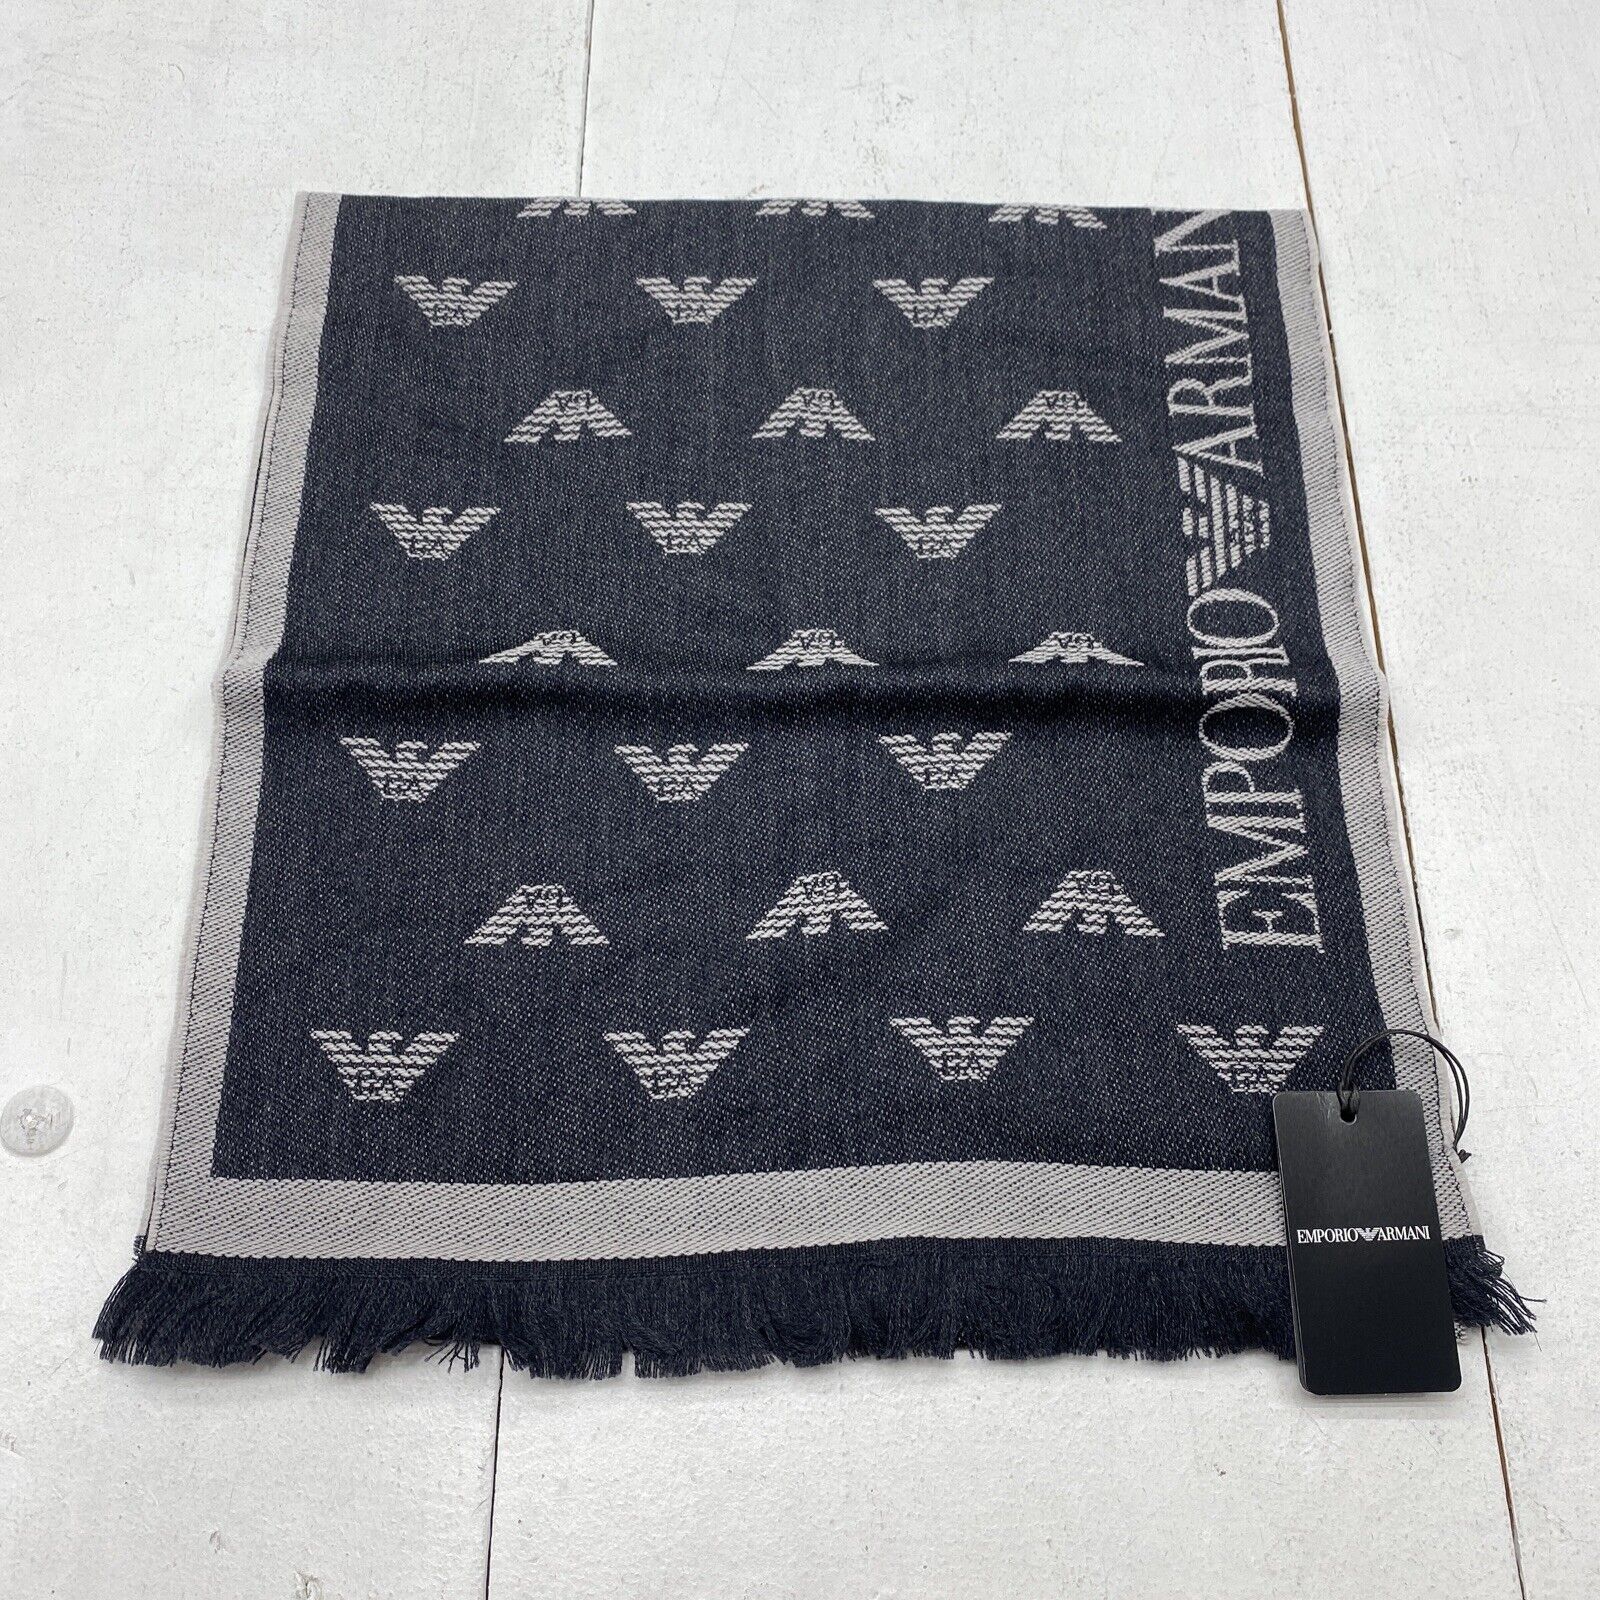 EMPORIO ARMANI All-Over Eagle Embroidered Wool Scarf Anthracite Grey New